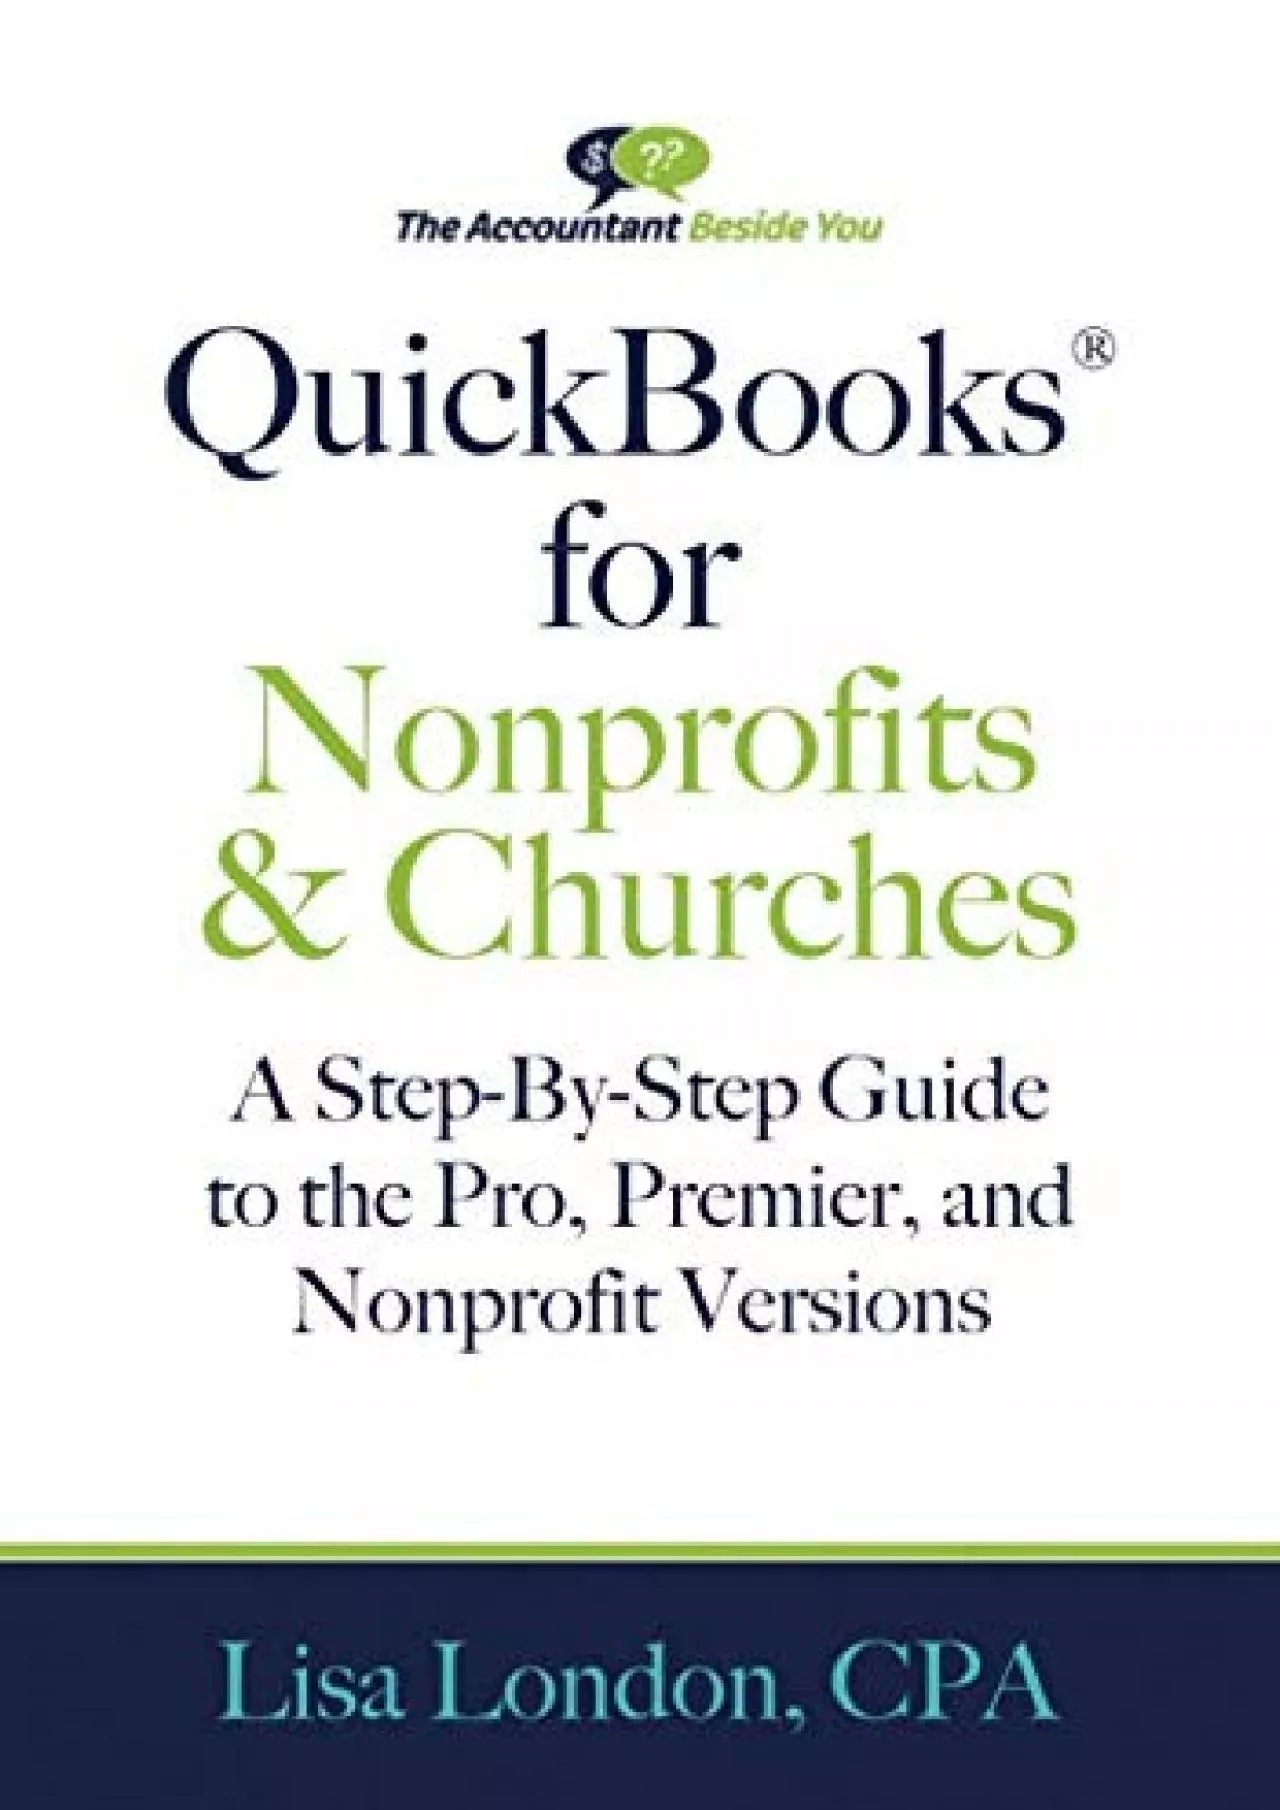 (BOOK)-QuickBooks for Nonprofits & Churches: A Setp-By-Step Guide to the Pro, Premier,